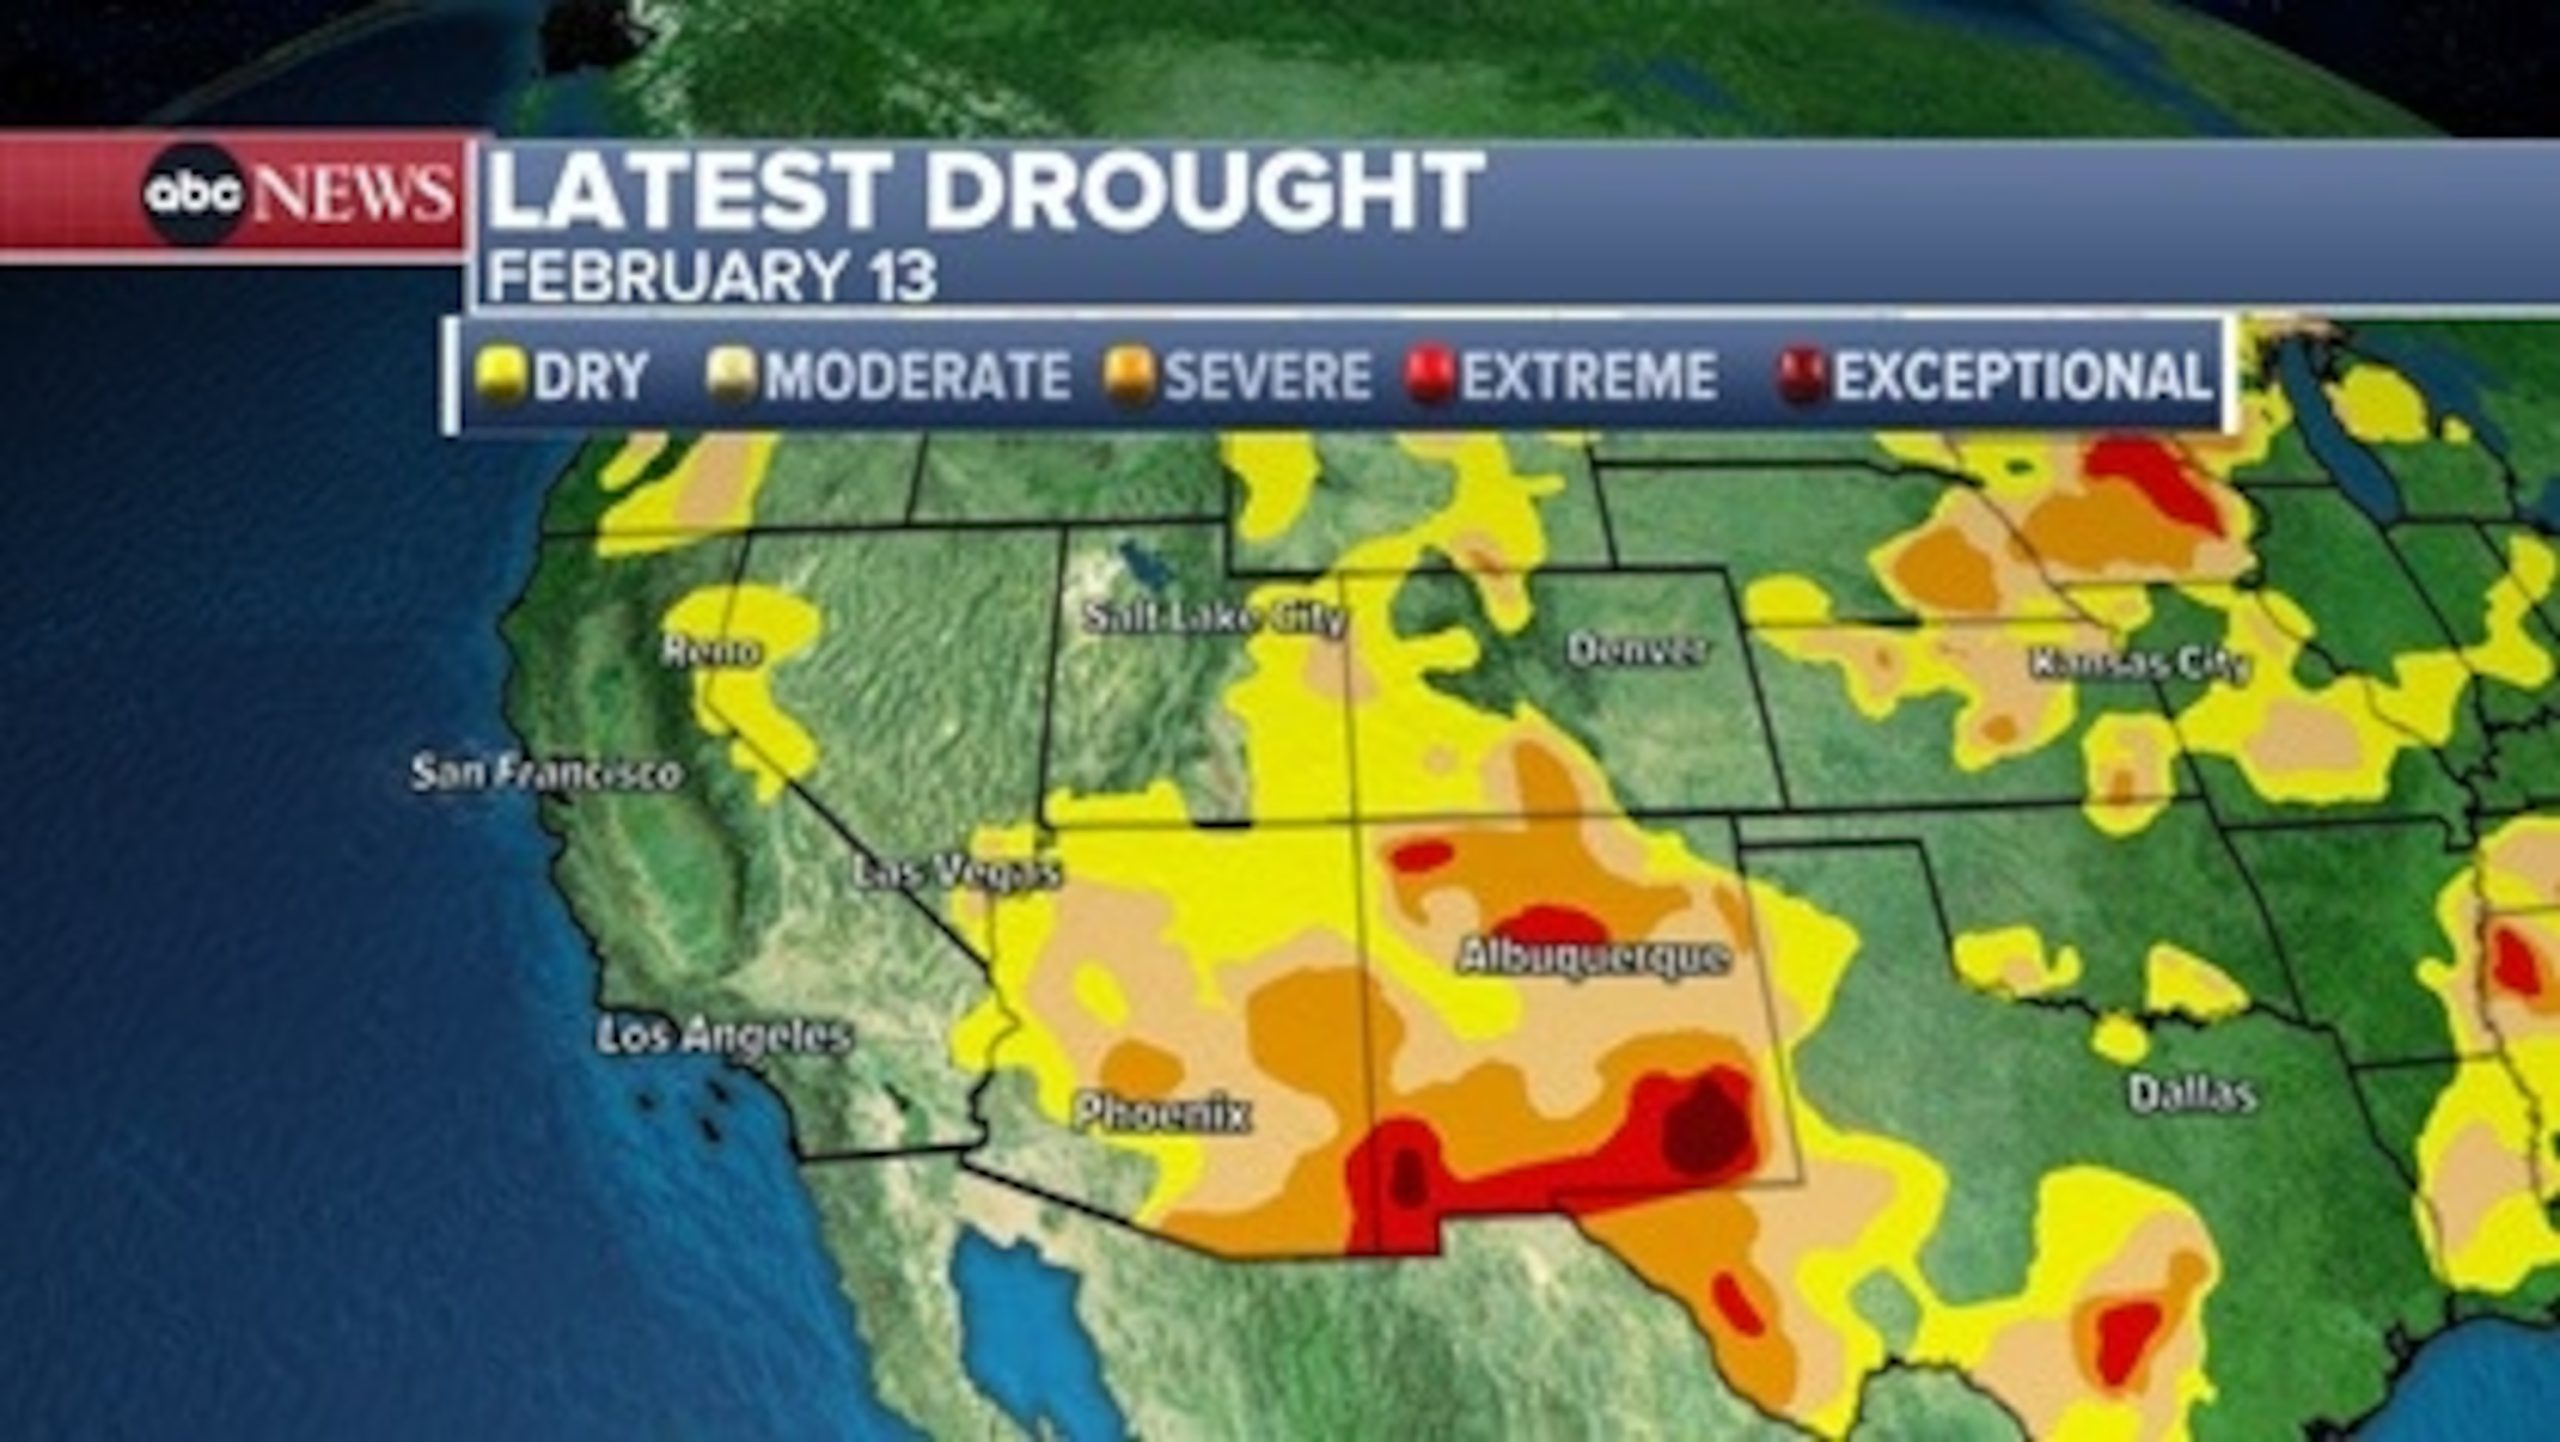 The persistence of megadrought in the Southwest US despite heavy rainfall